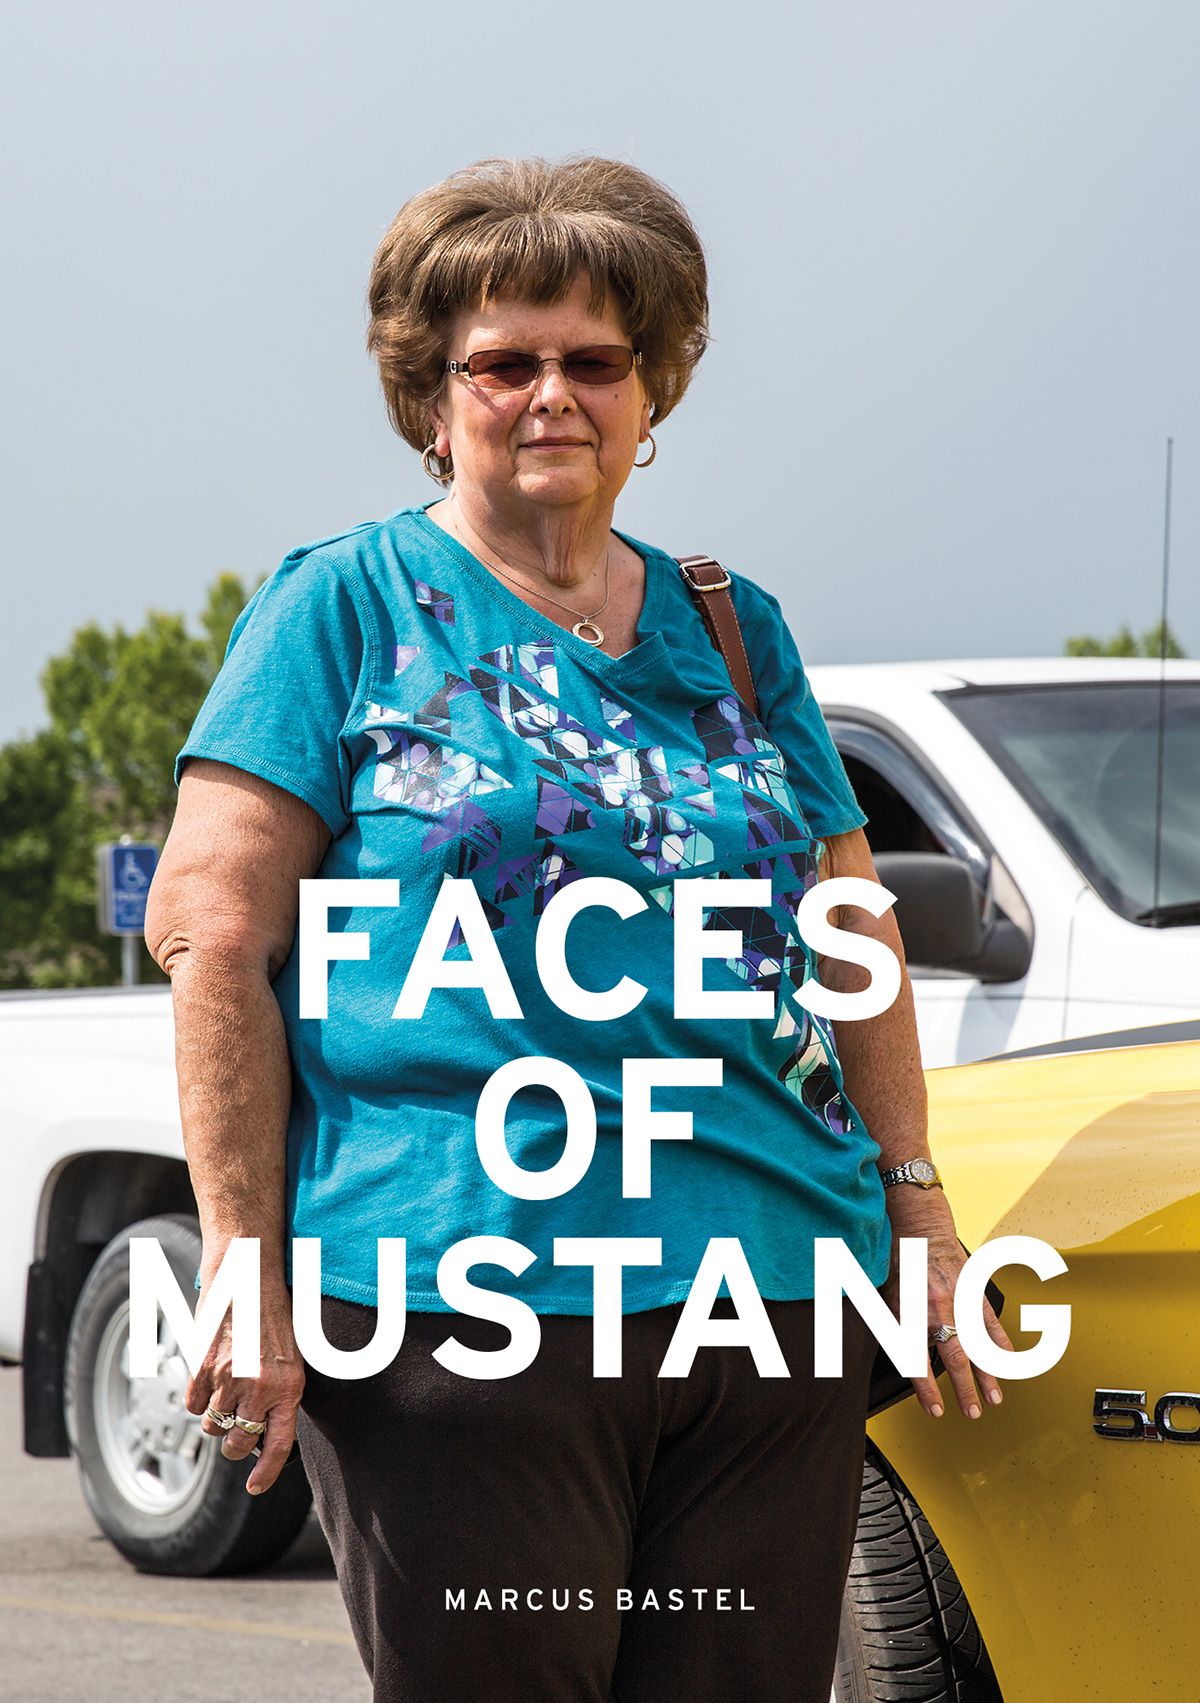 Faces of Mustang